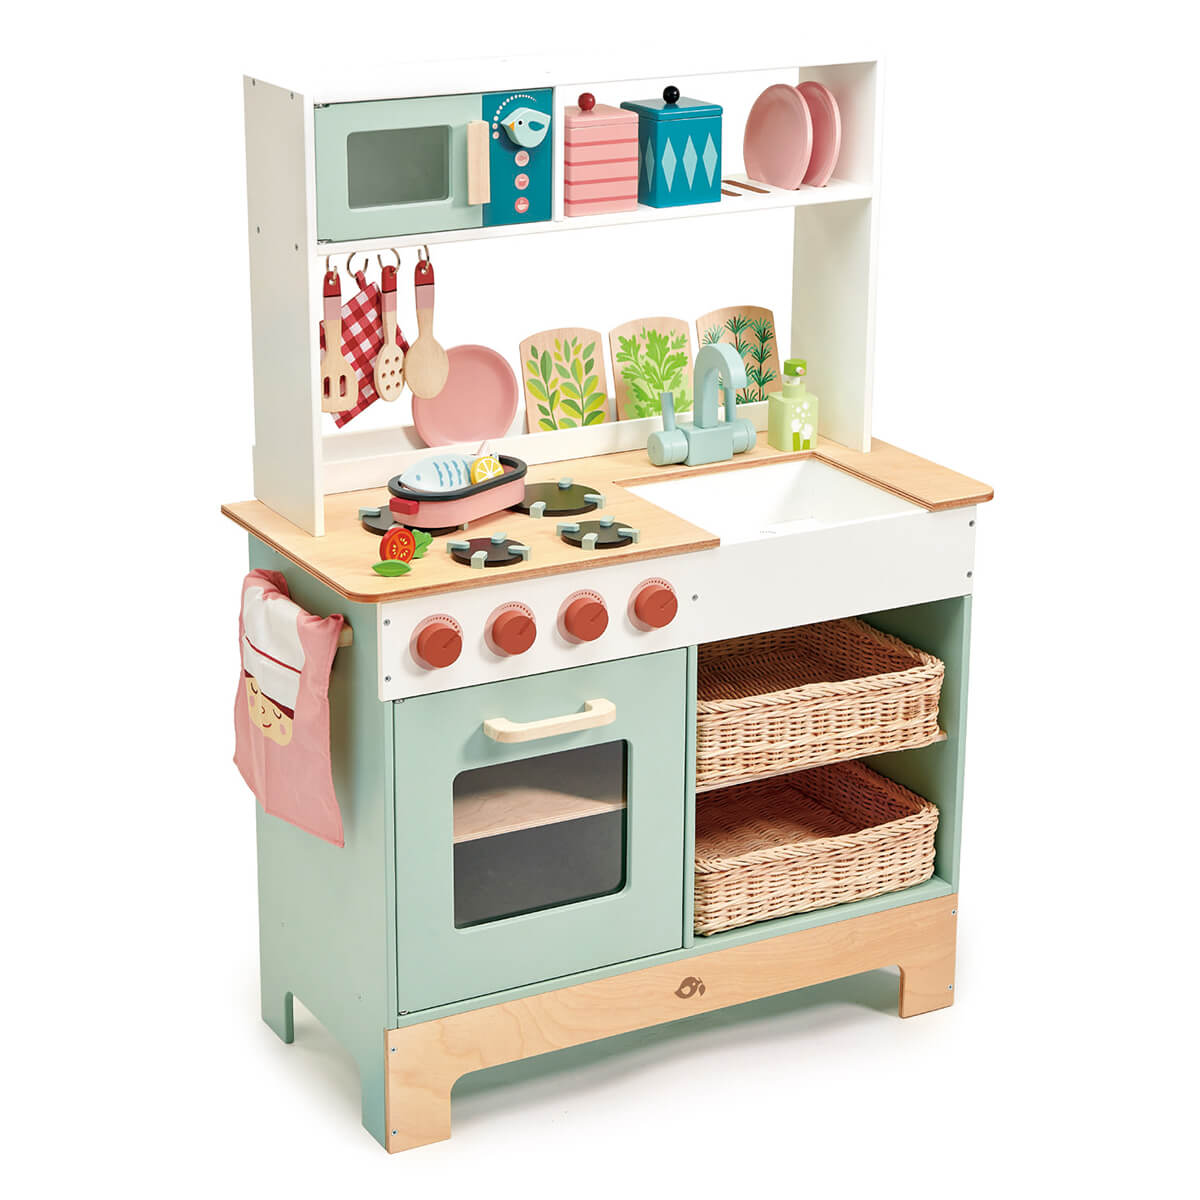 play toy kitchen gift for kids